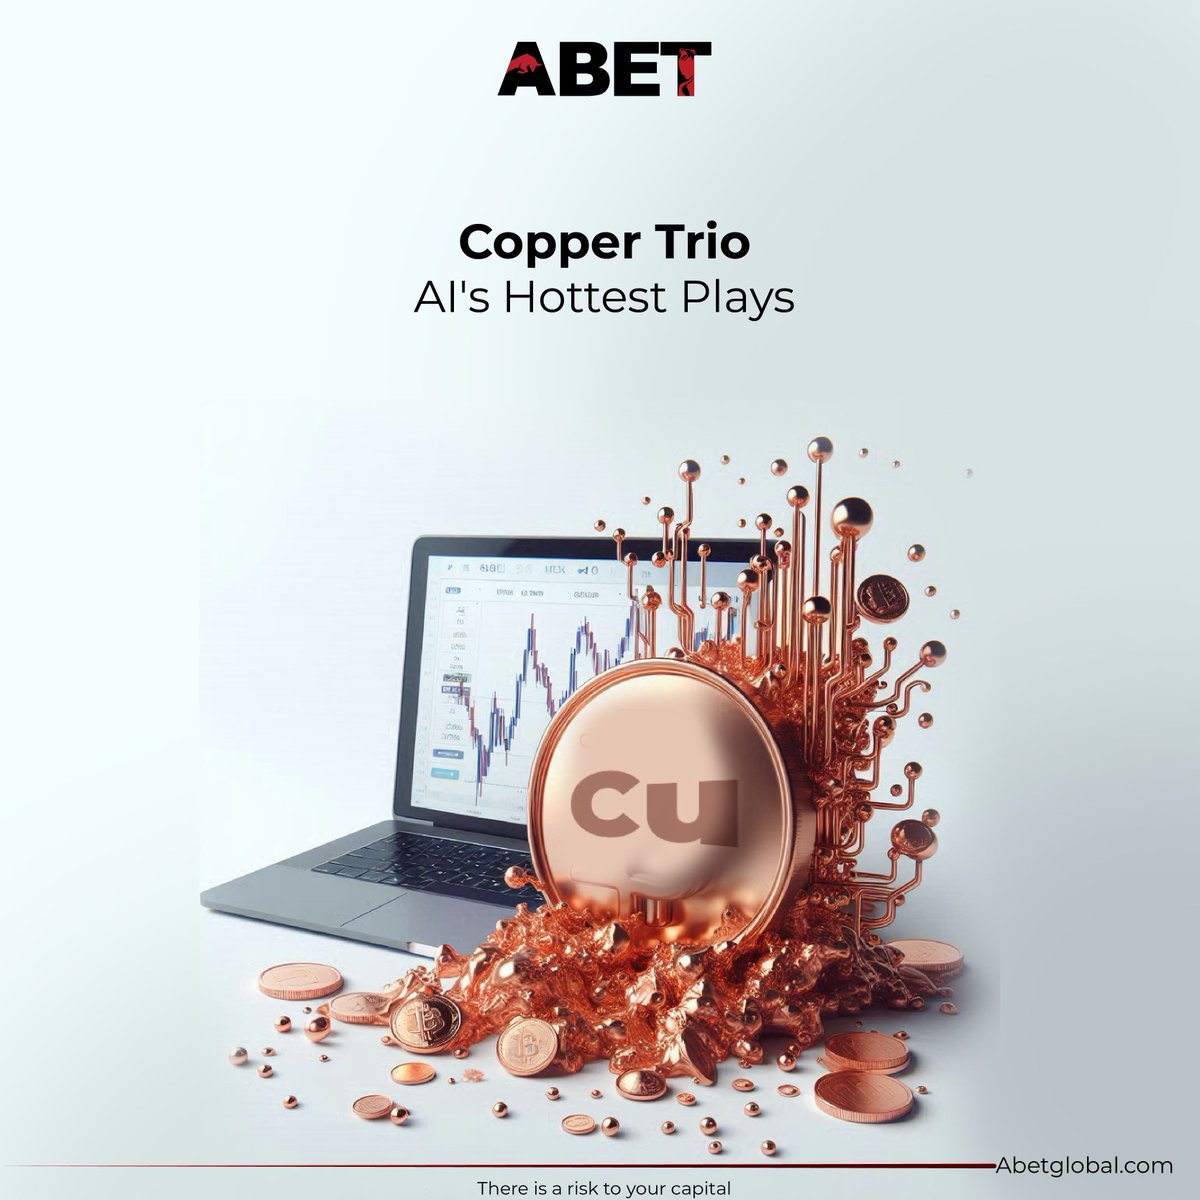 Copper Trio - AI's Hottest Plays

Wall Street is buzzing about copper and the potential AI-powered gains in this oft-overlooked commodity.
Read More: linkedin.com/feed/update/ur…

abetglobal.com

#copper #ai #mining #industrialmetals #investing #stocks #AbetGlobal